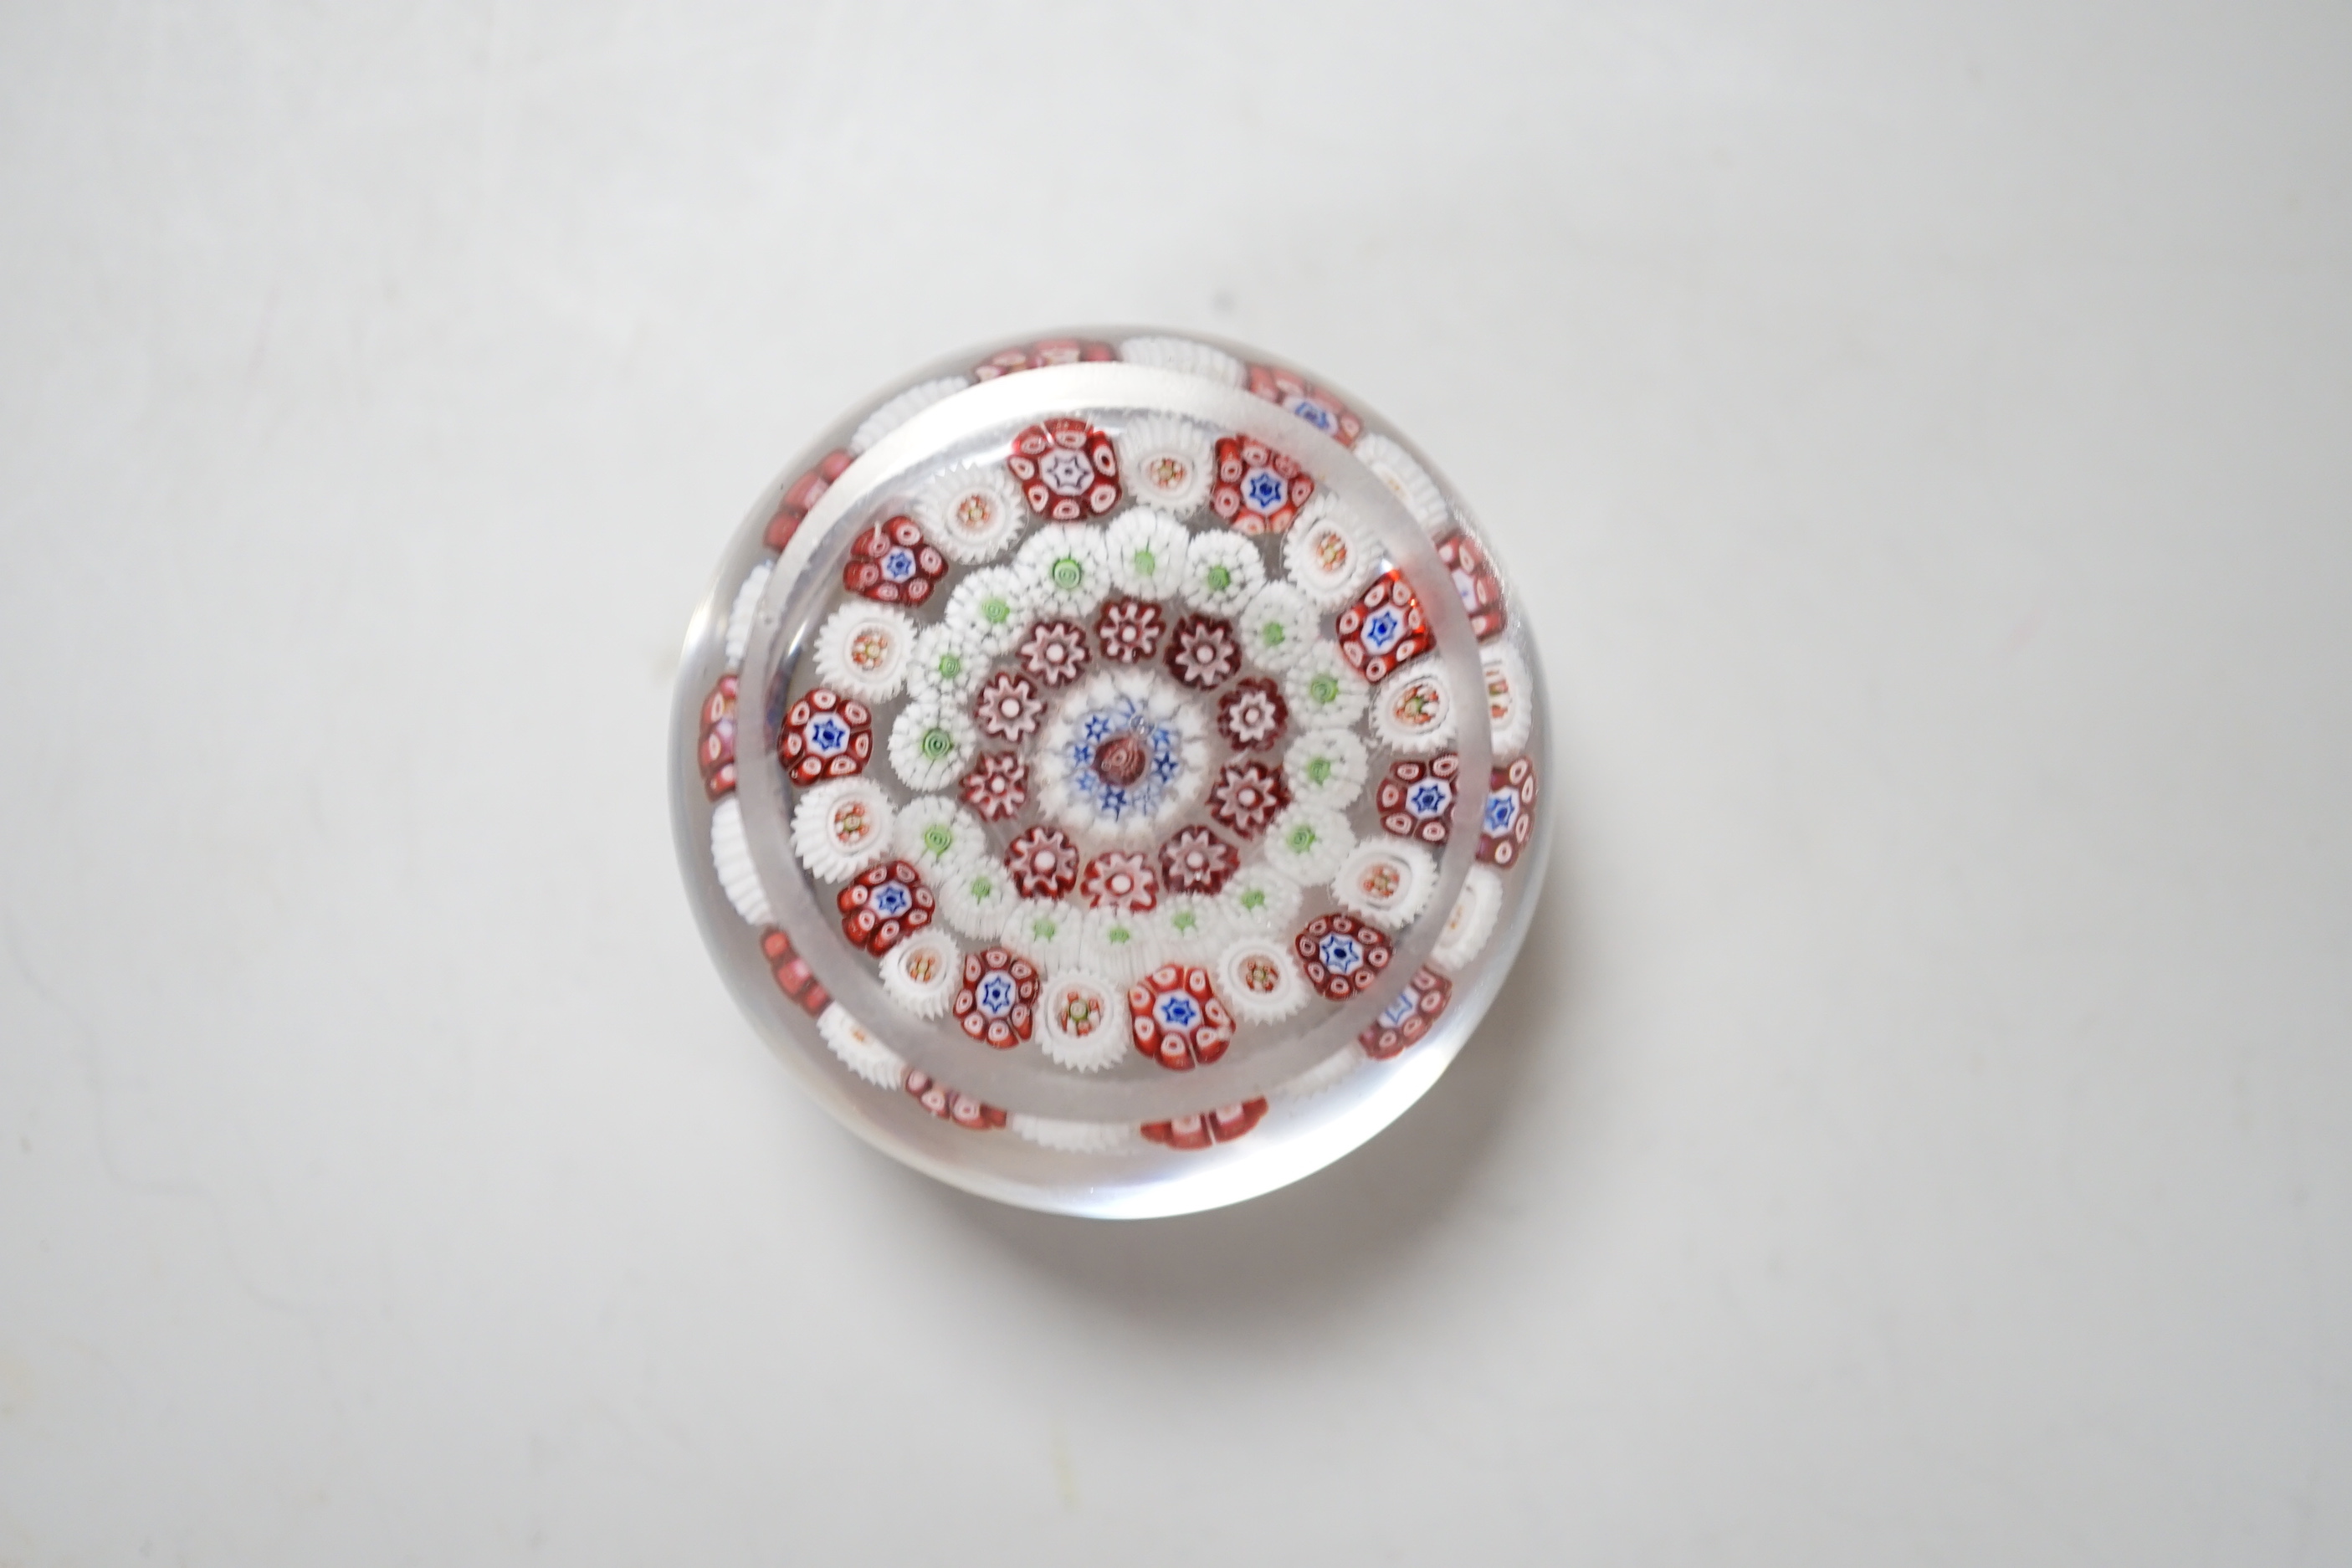 A Baccarat concentric millefleur cane paperweight, approximate diameter 4.25